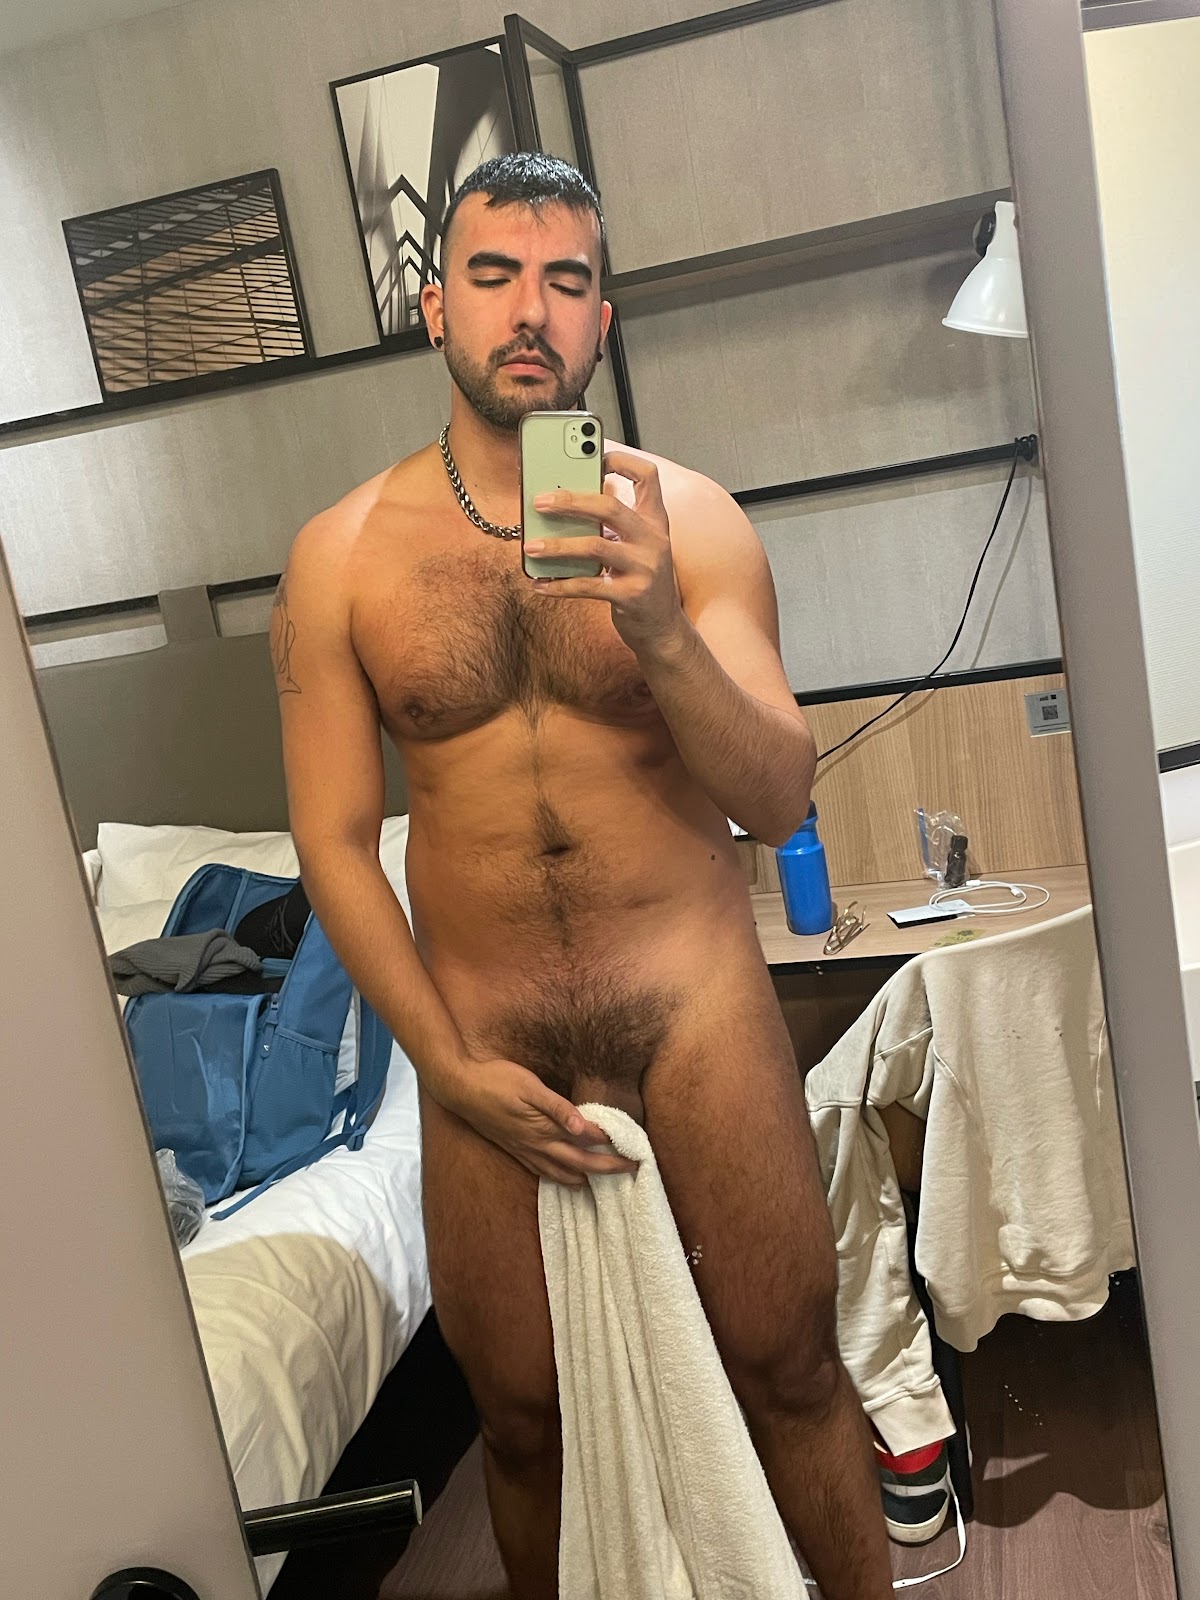 gay xxx porn creator Phil naked holding a towel over his flaccid cock in paris hotel room taking an iphone mirror selfie